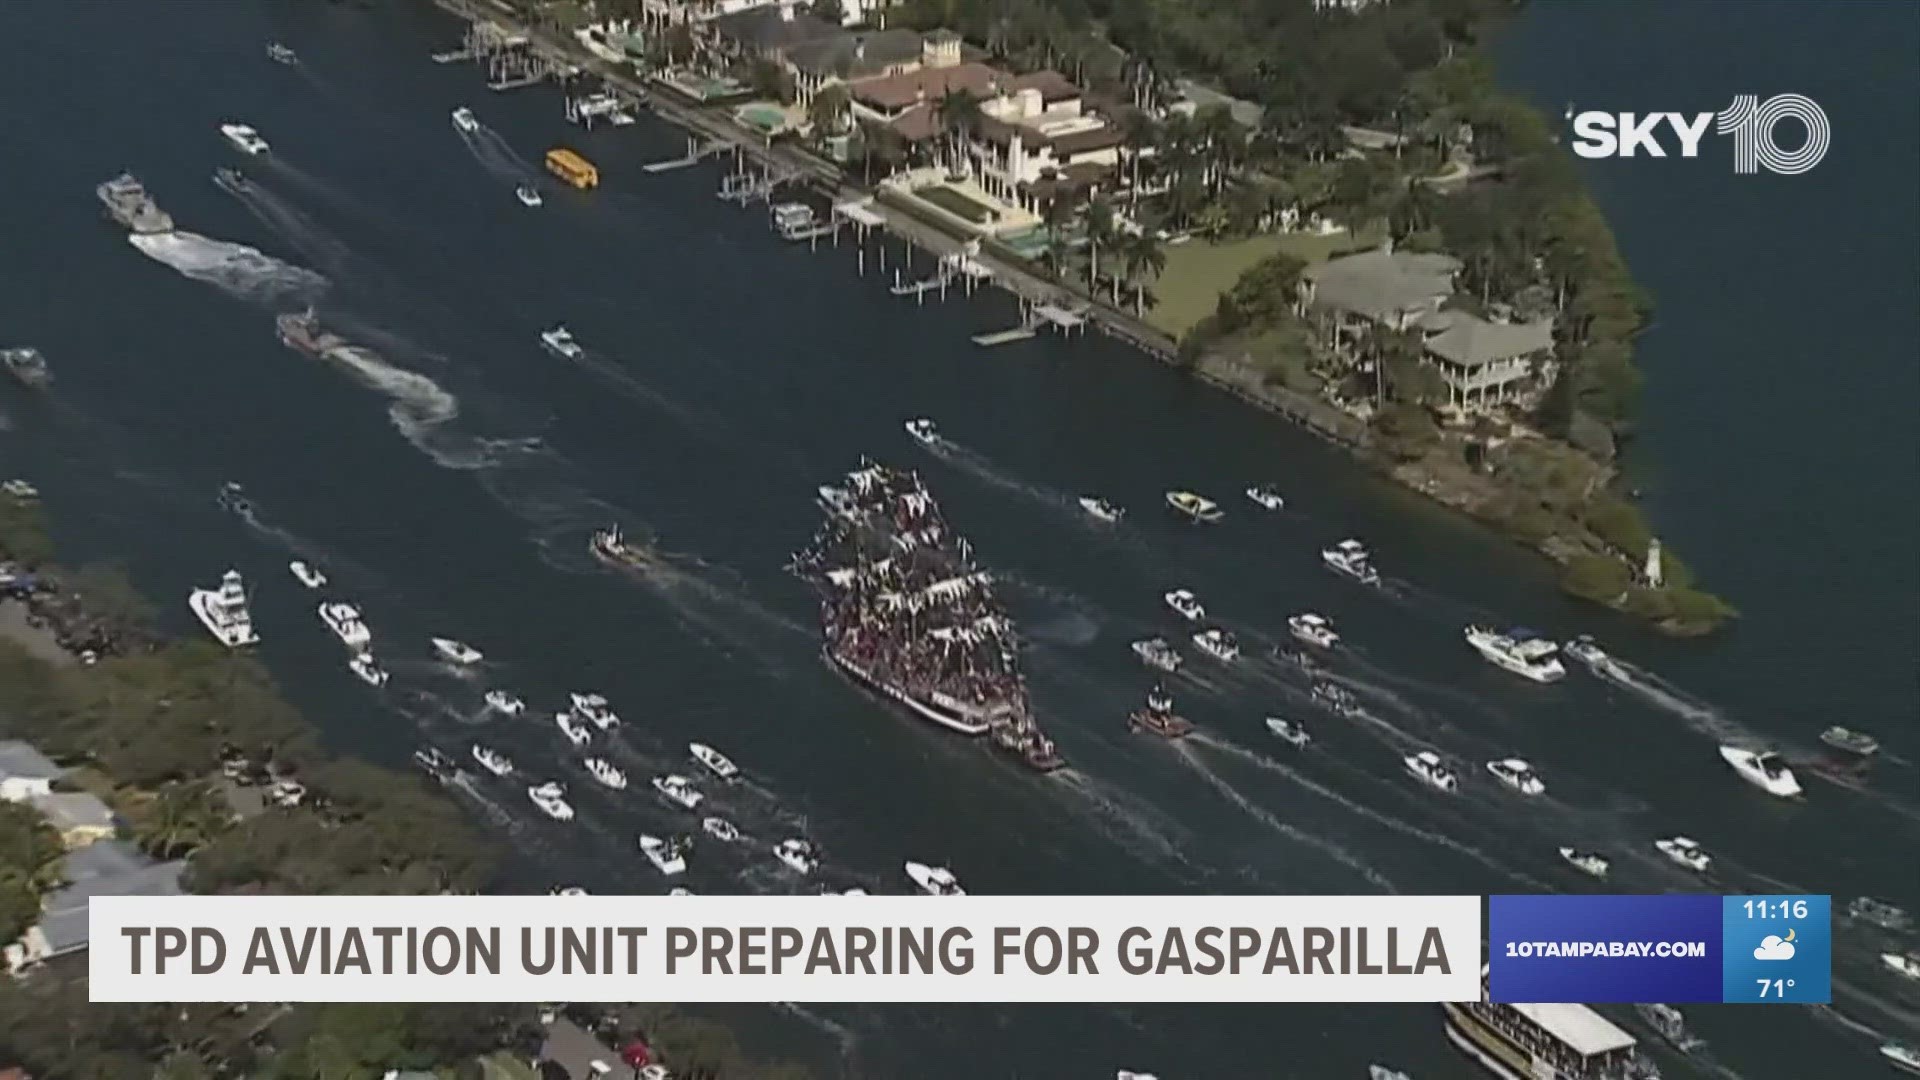 Safety precautions will be in full effect as the annual festivities are expected to draw a crowd of roughly 300,000 to the streets of Tampa this weekend.